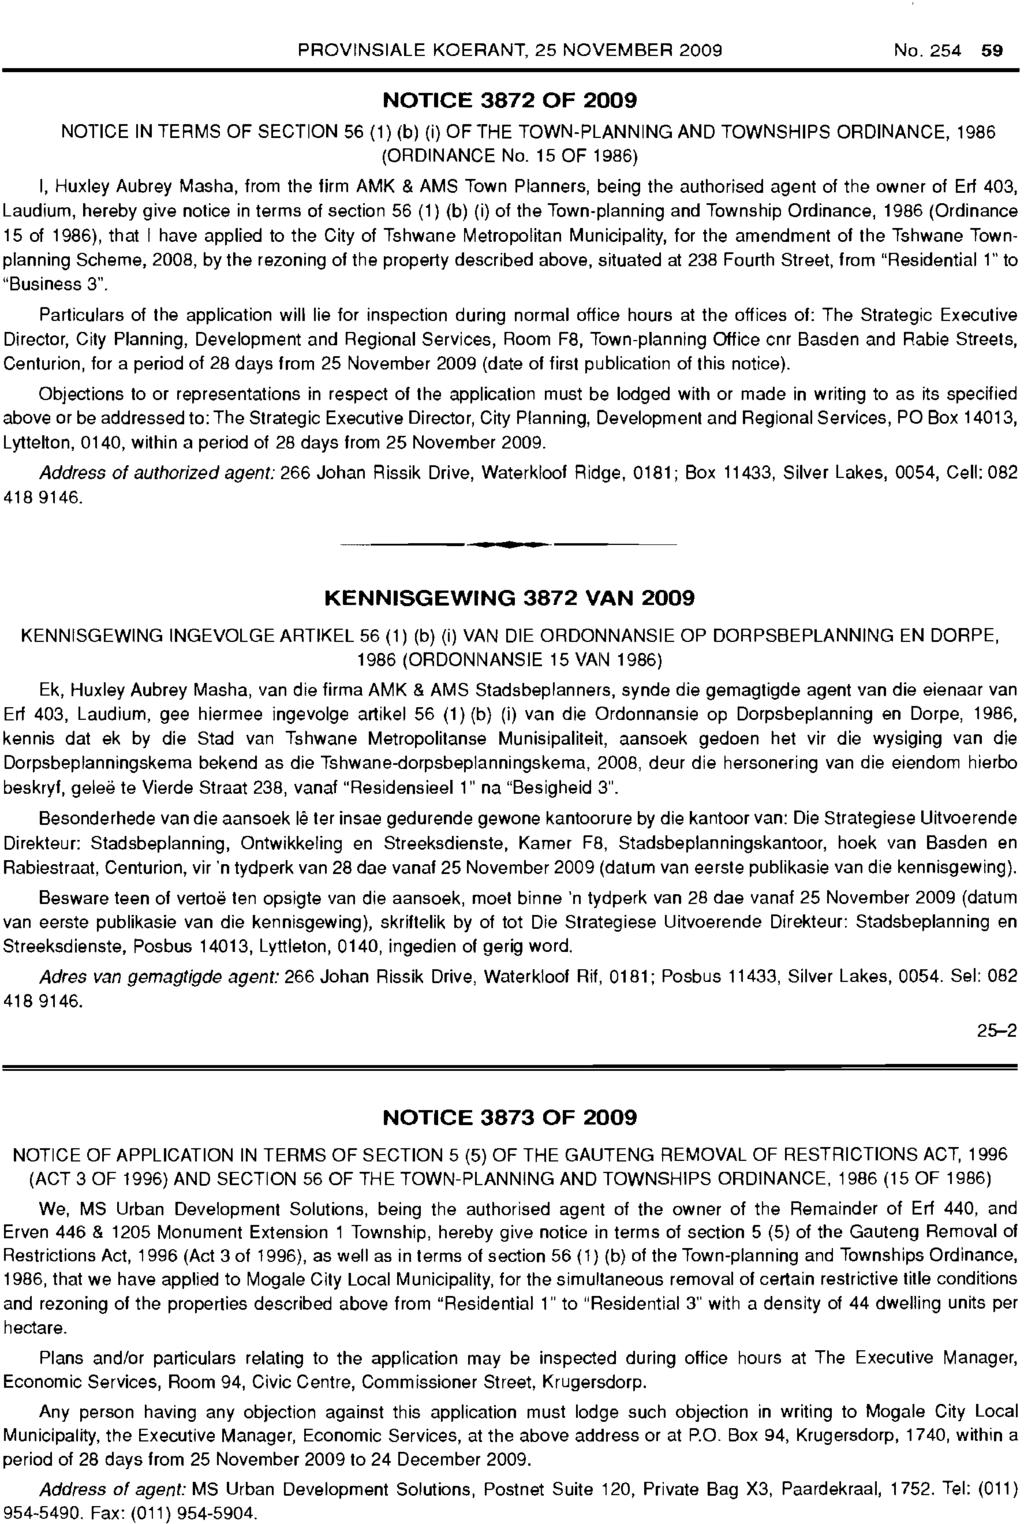 PROVINSIALE KOERANT, 25 NOVEMBER 2009 NO.254 59 NOTICE 3872 OF 2009 NOTICE IN TERMS OF SECTION 56 (1) (b) (i) OF THE TOWN-PLANNING AND TOWNSHIPS ORDINANCE, 1986 (ORDINANCE No.